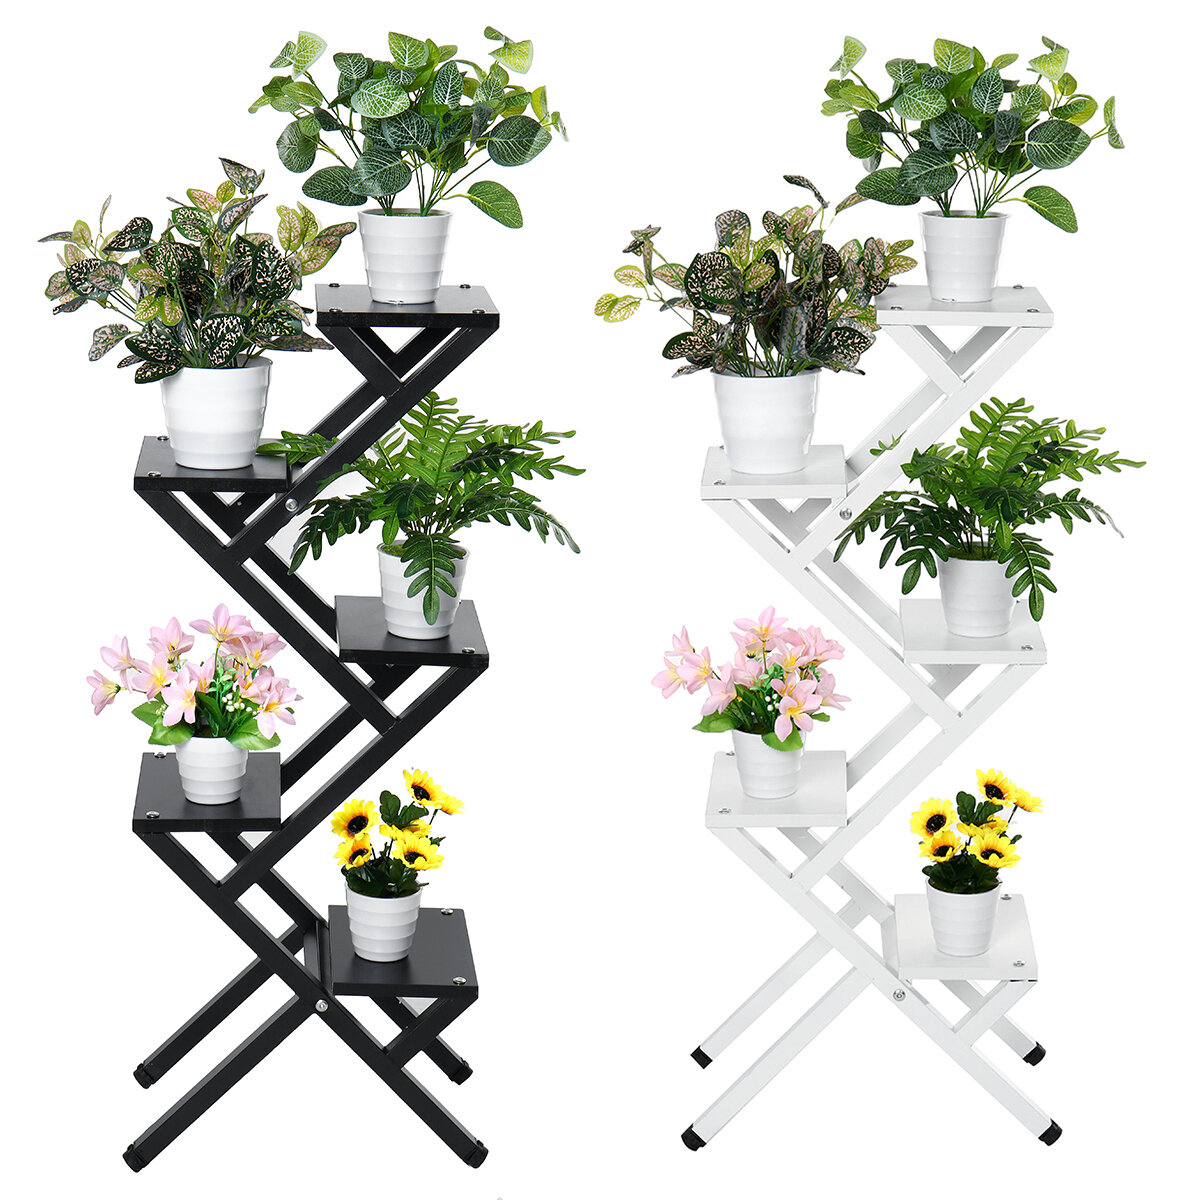 4/5 Layers Multifunctional Iron Flower Stand Ladder Plant Display Shelf Balcony Garden Decor Home Office Furniture